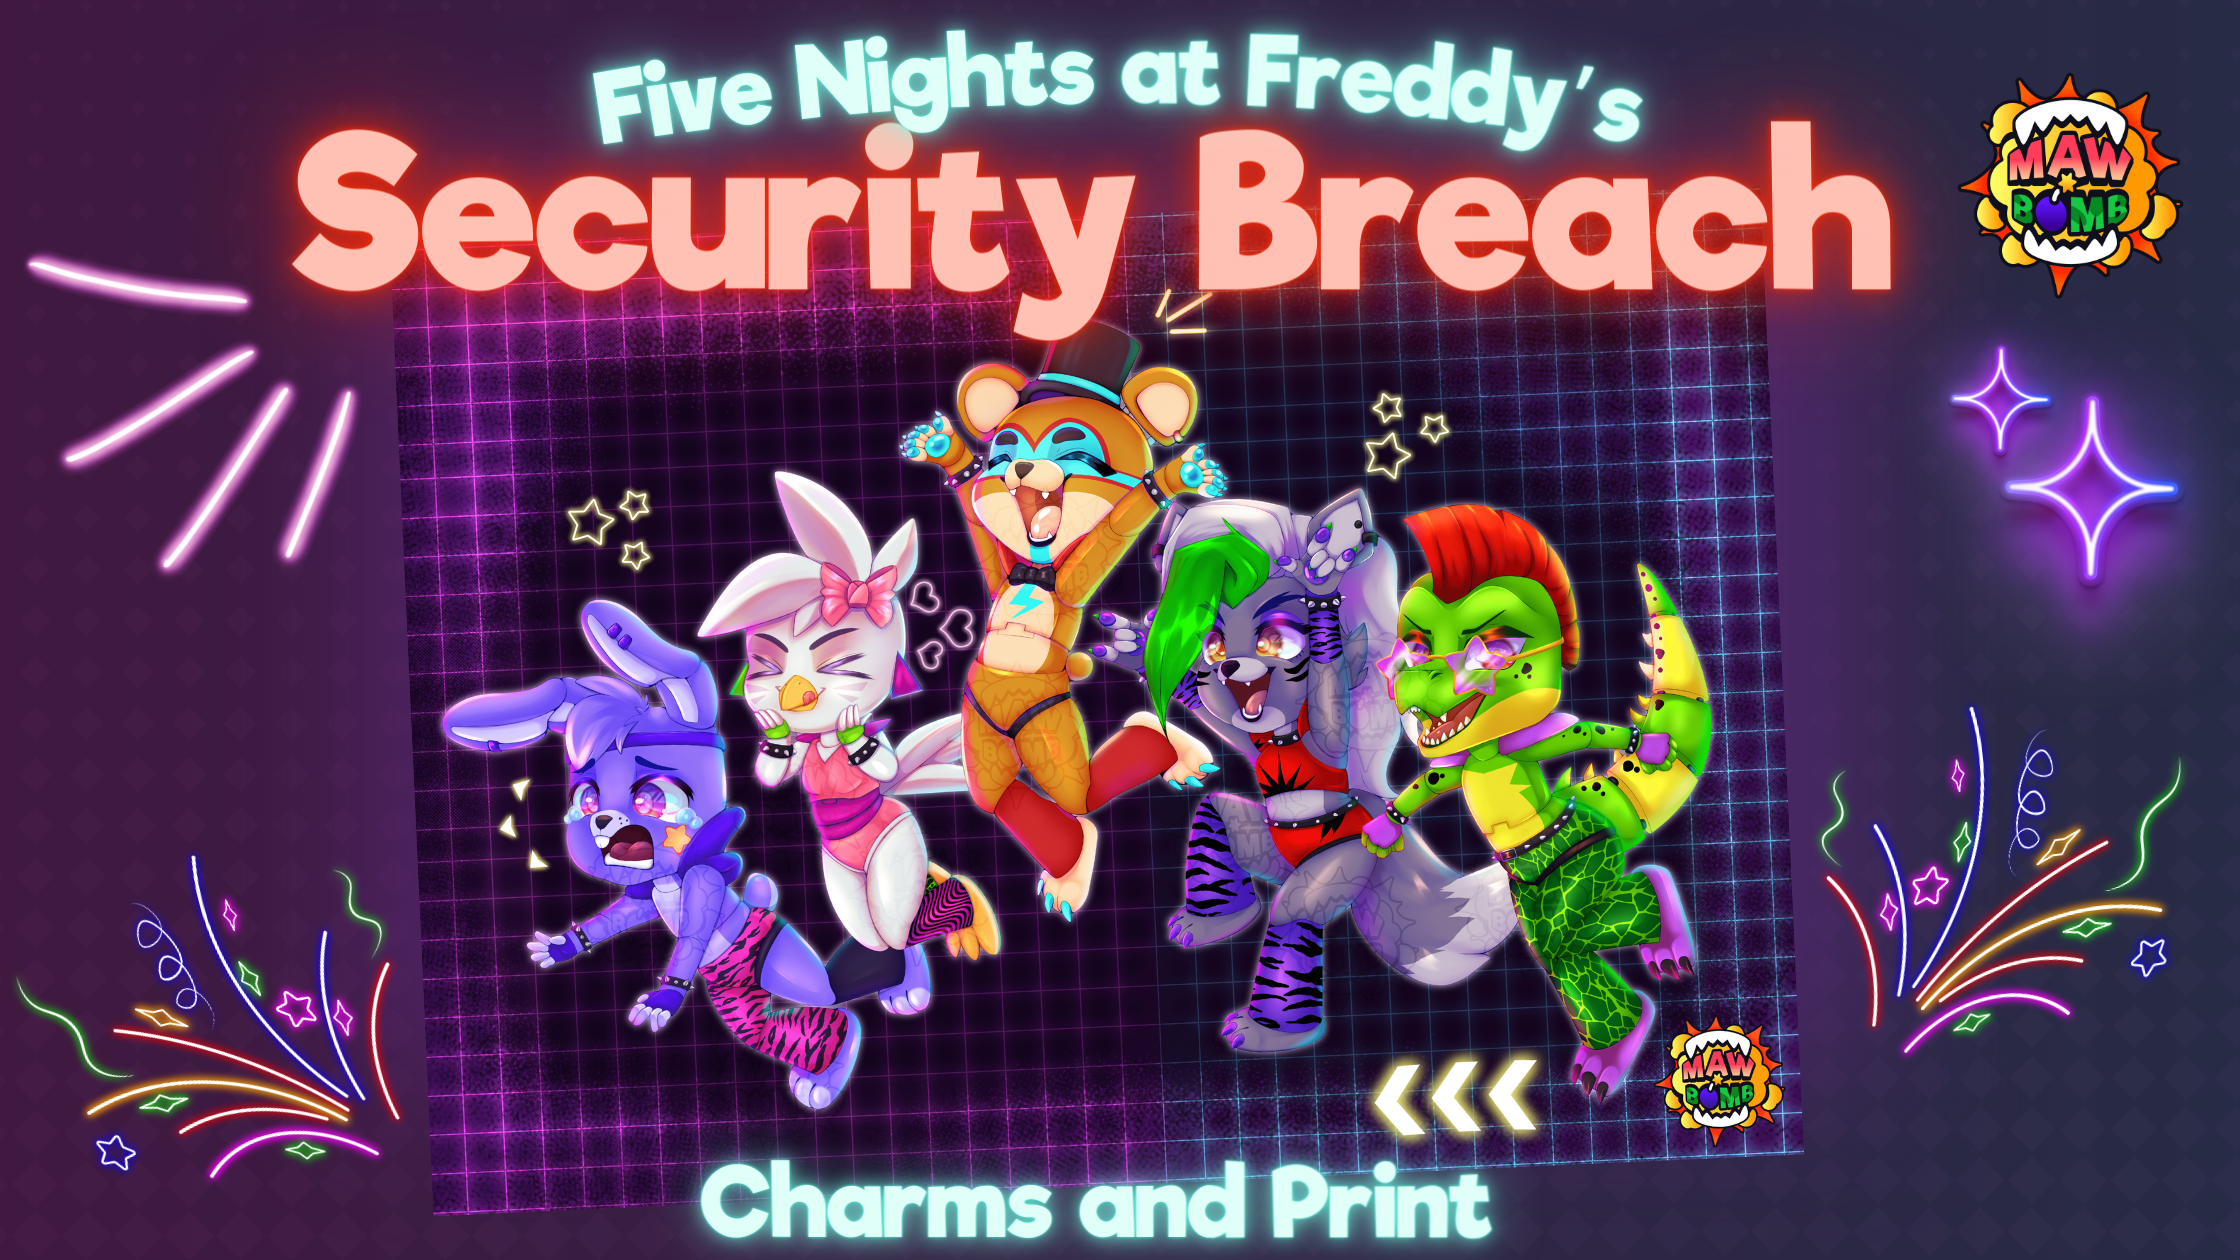 FNAF security breach characters in my own ways/AUs - Sapphire